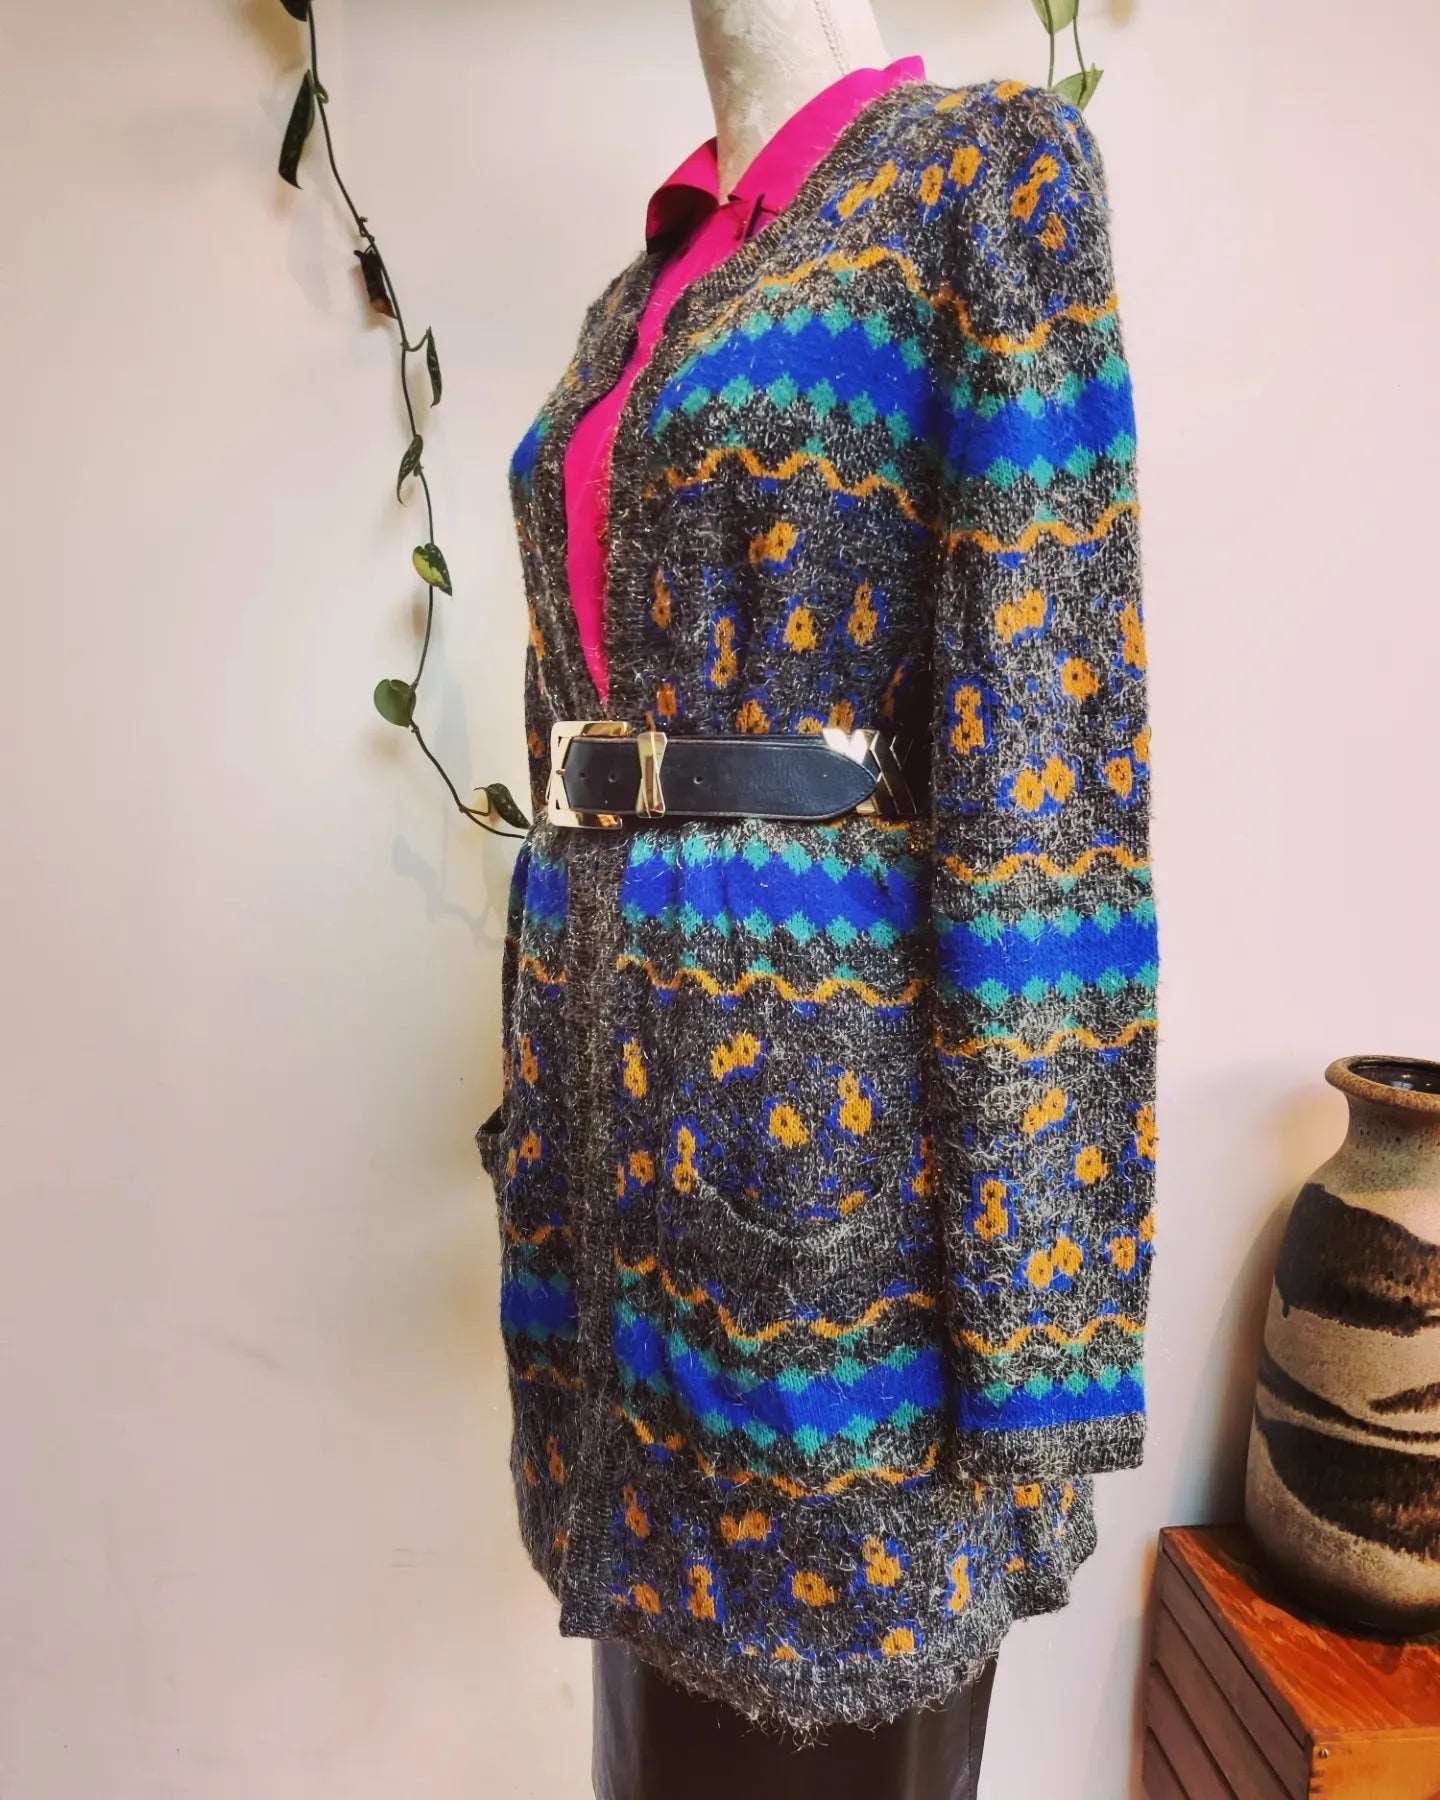 Vintage multicoloured knitted cardigan. Size 12-18.